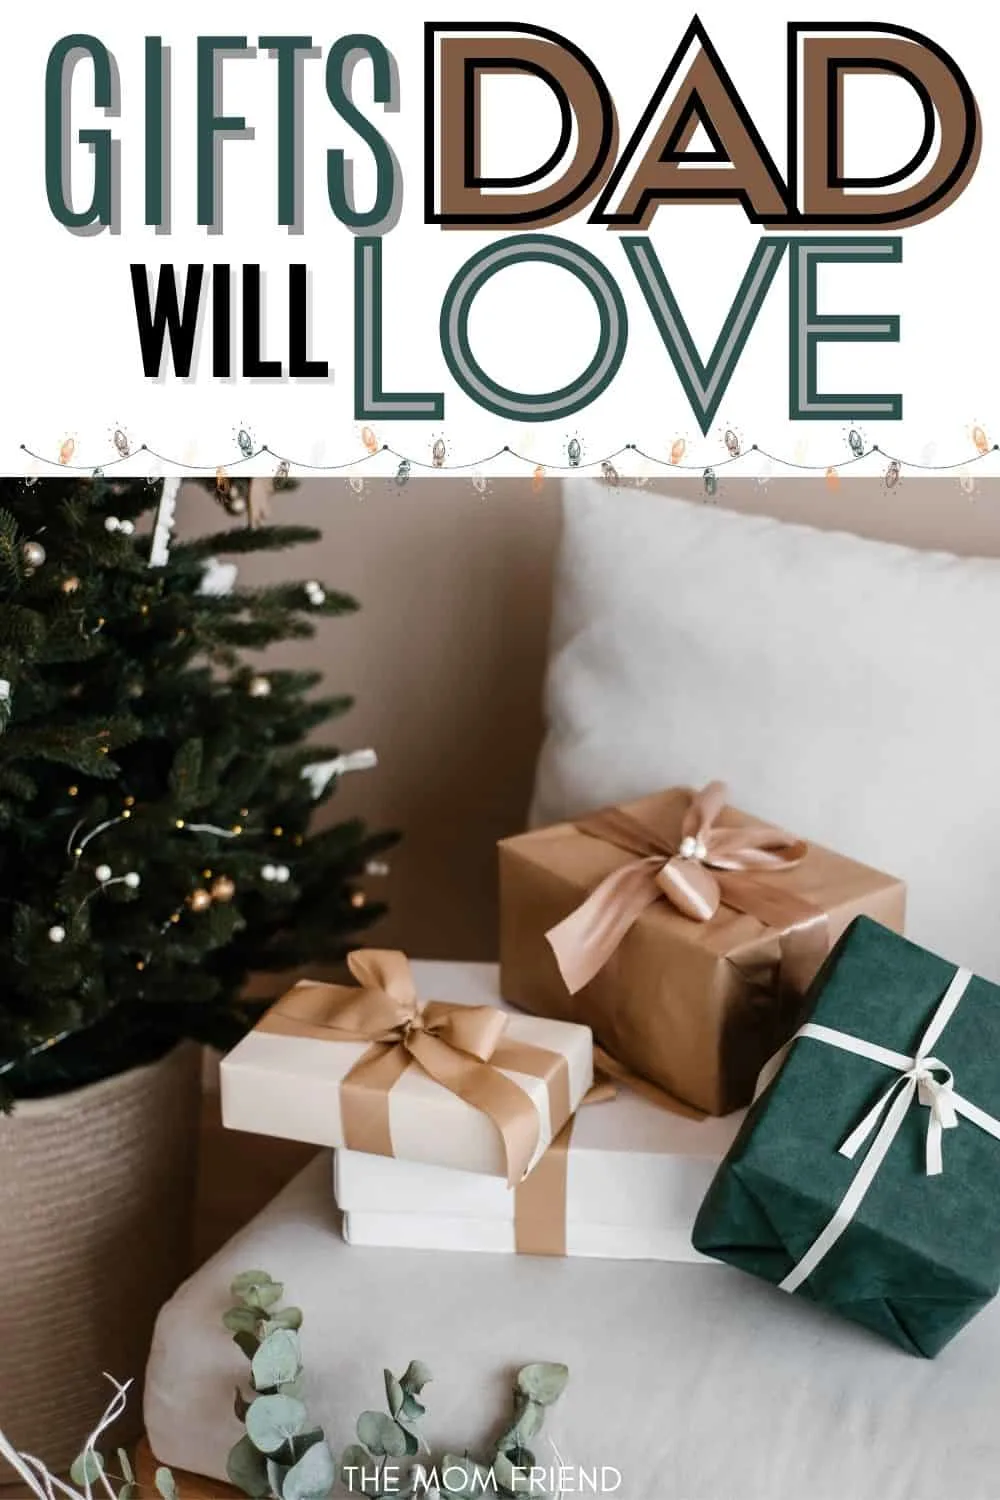 christmas tree with gifts for dad wrapped and text gifts dad will love